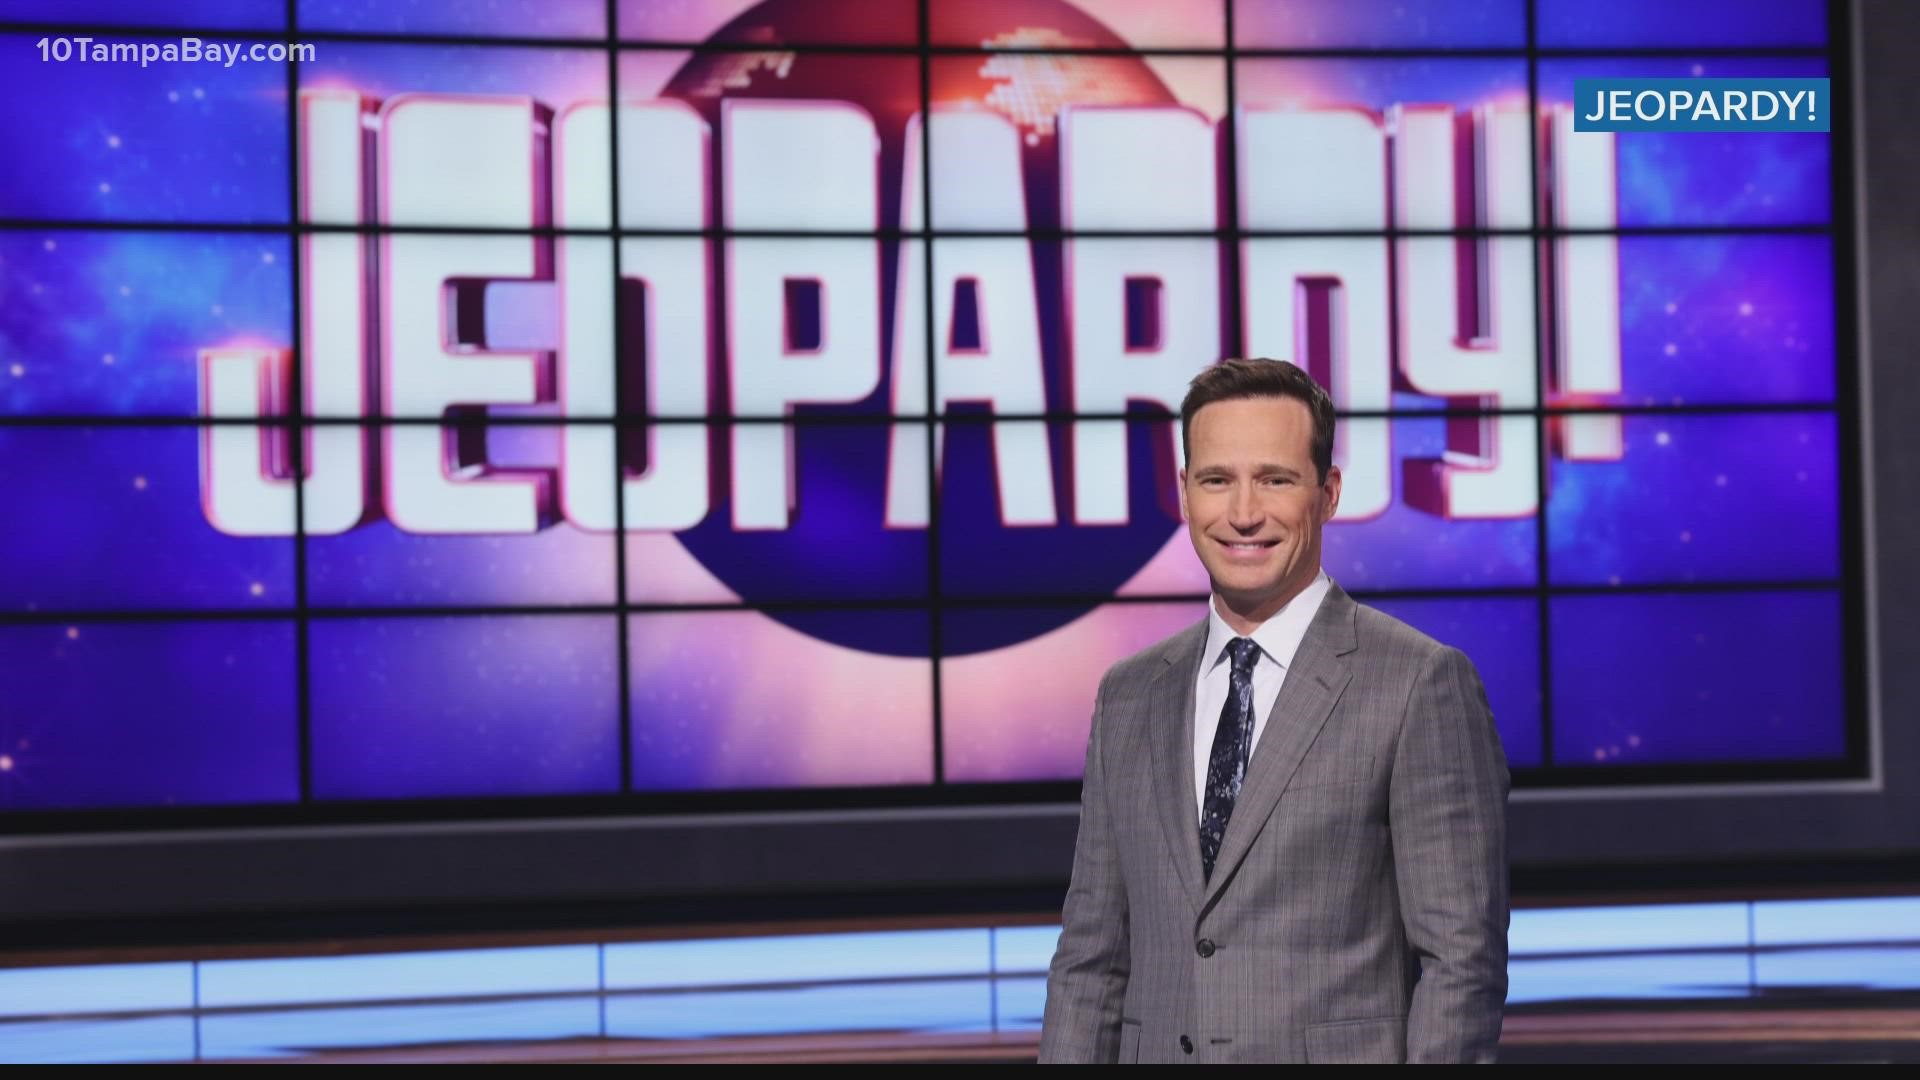 Mike Richards said that moving forward with him as "Jeopardy!" host would be “too much of a distraction for our fans and not the right move for the show.”